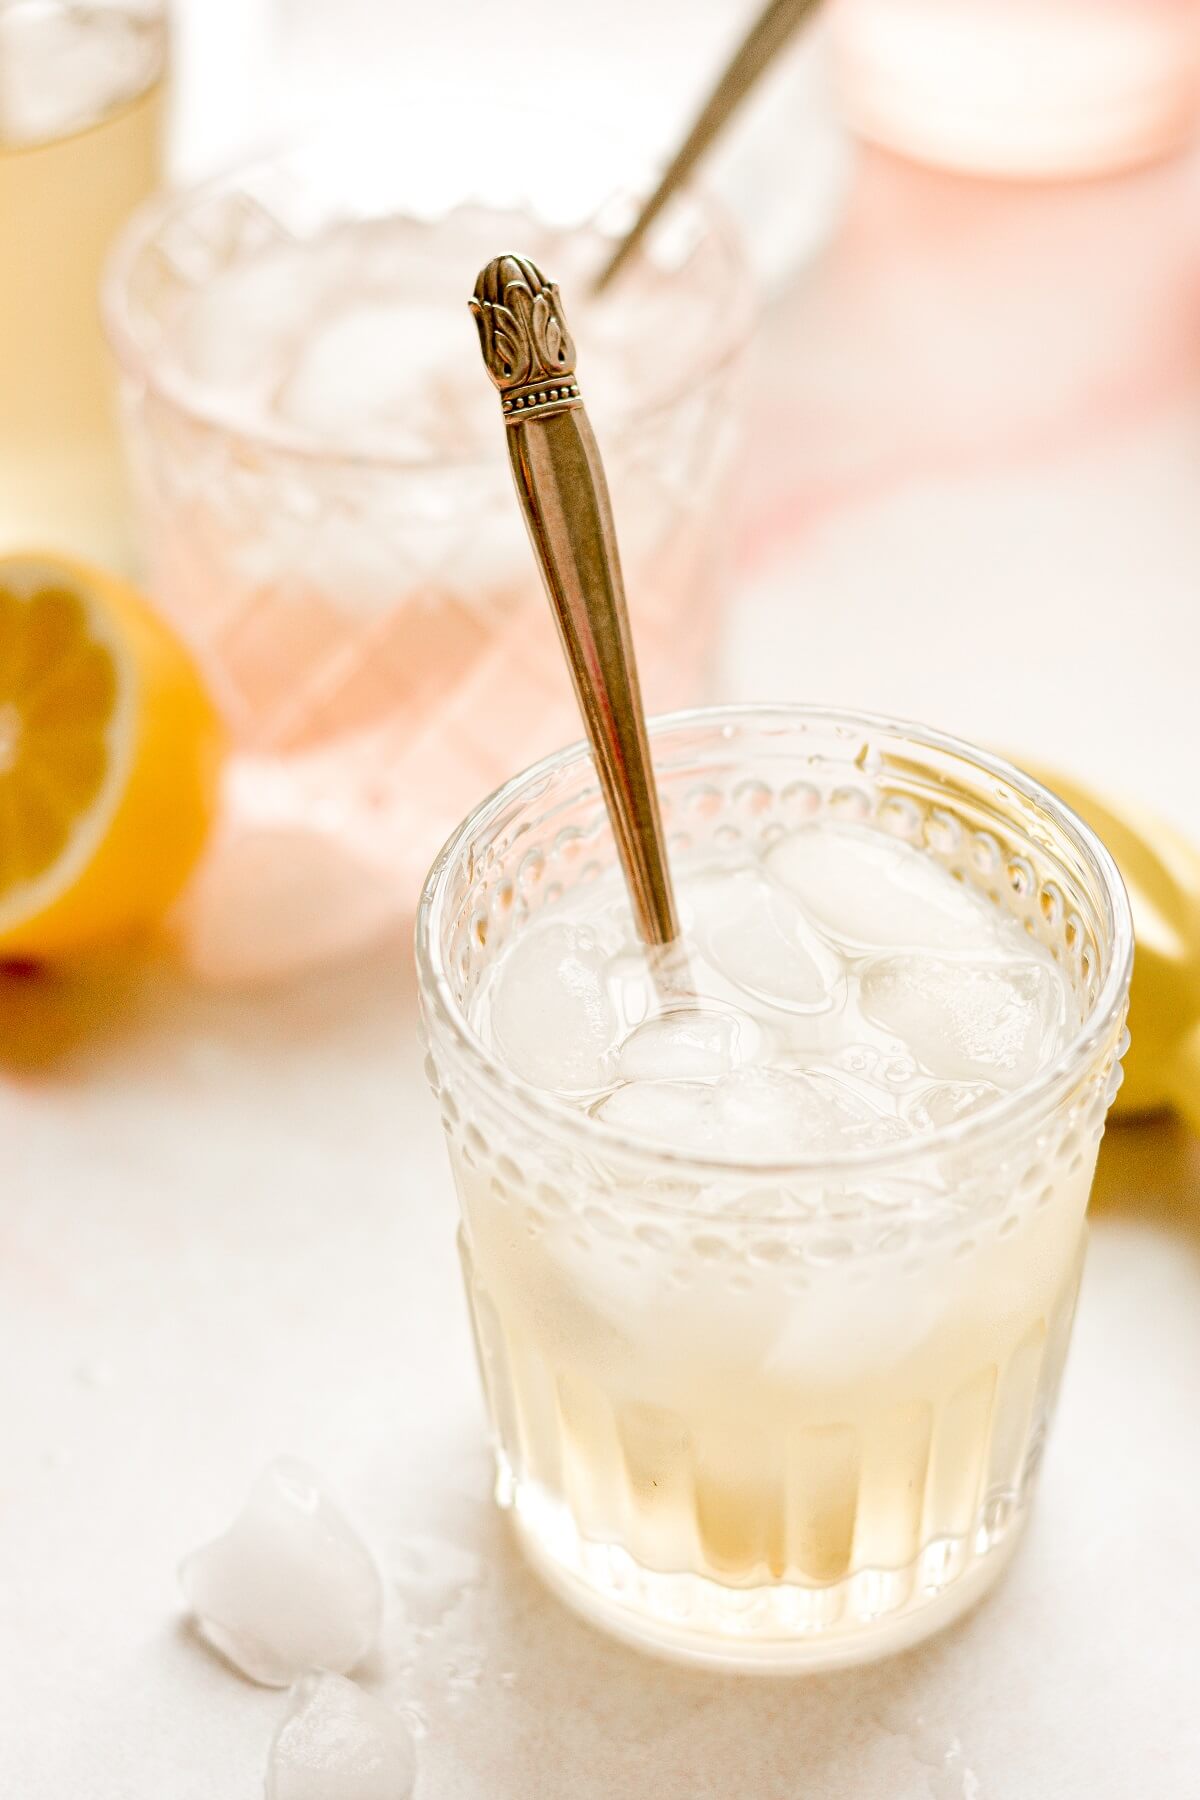 A glass of lemonade, sweetened with ginger syrup.